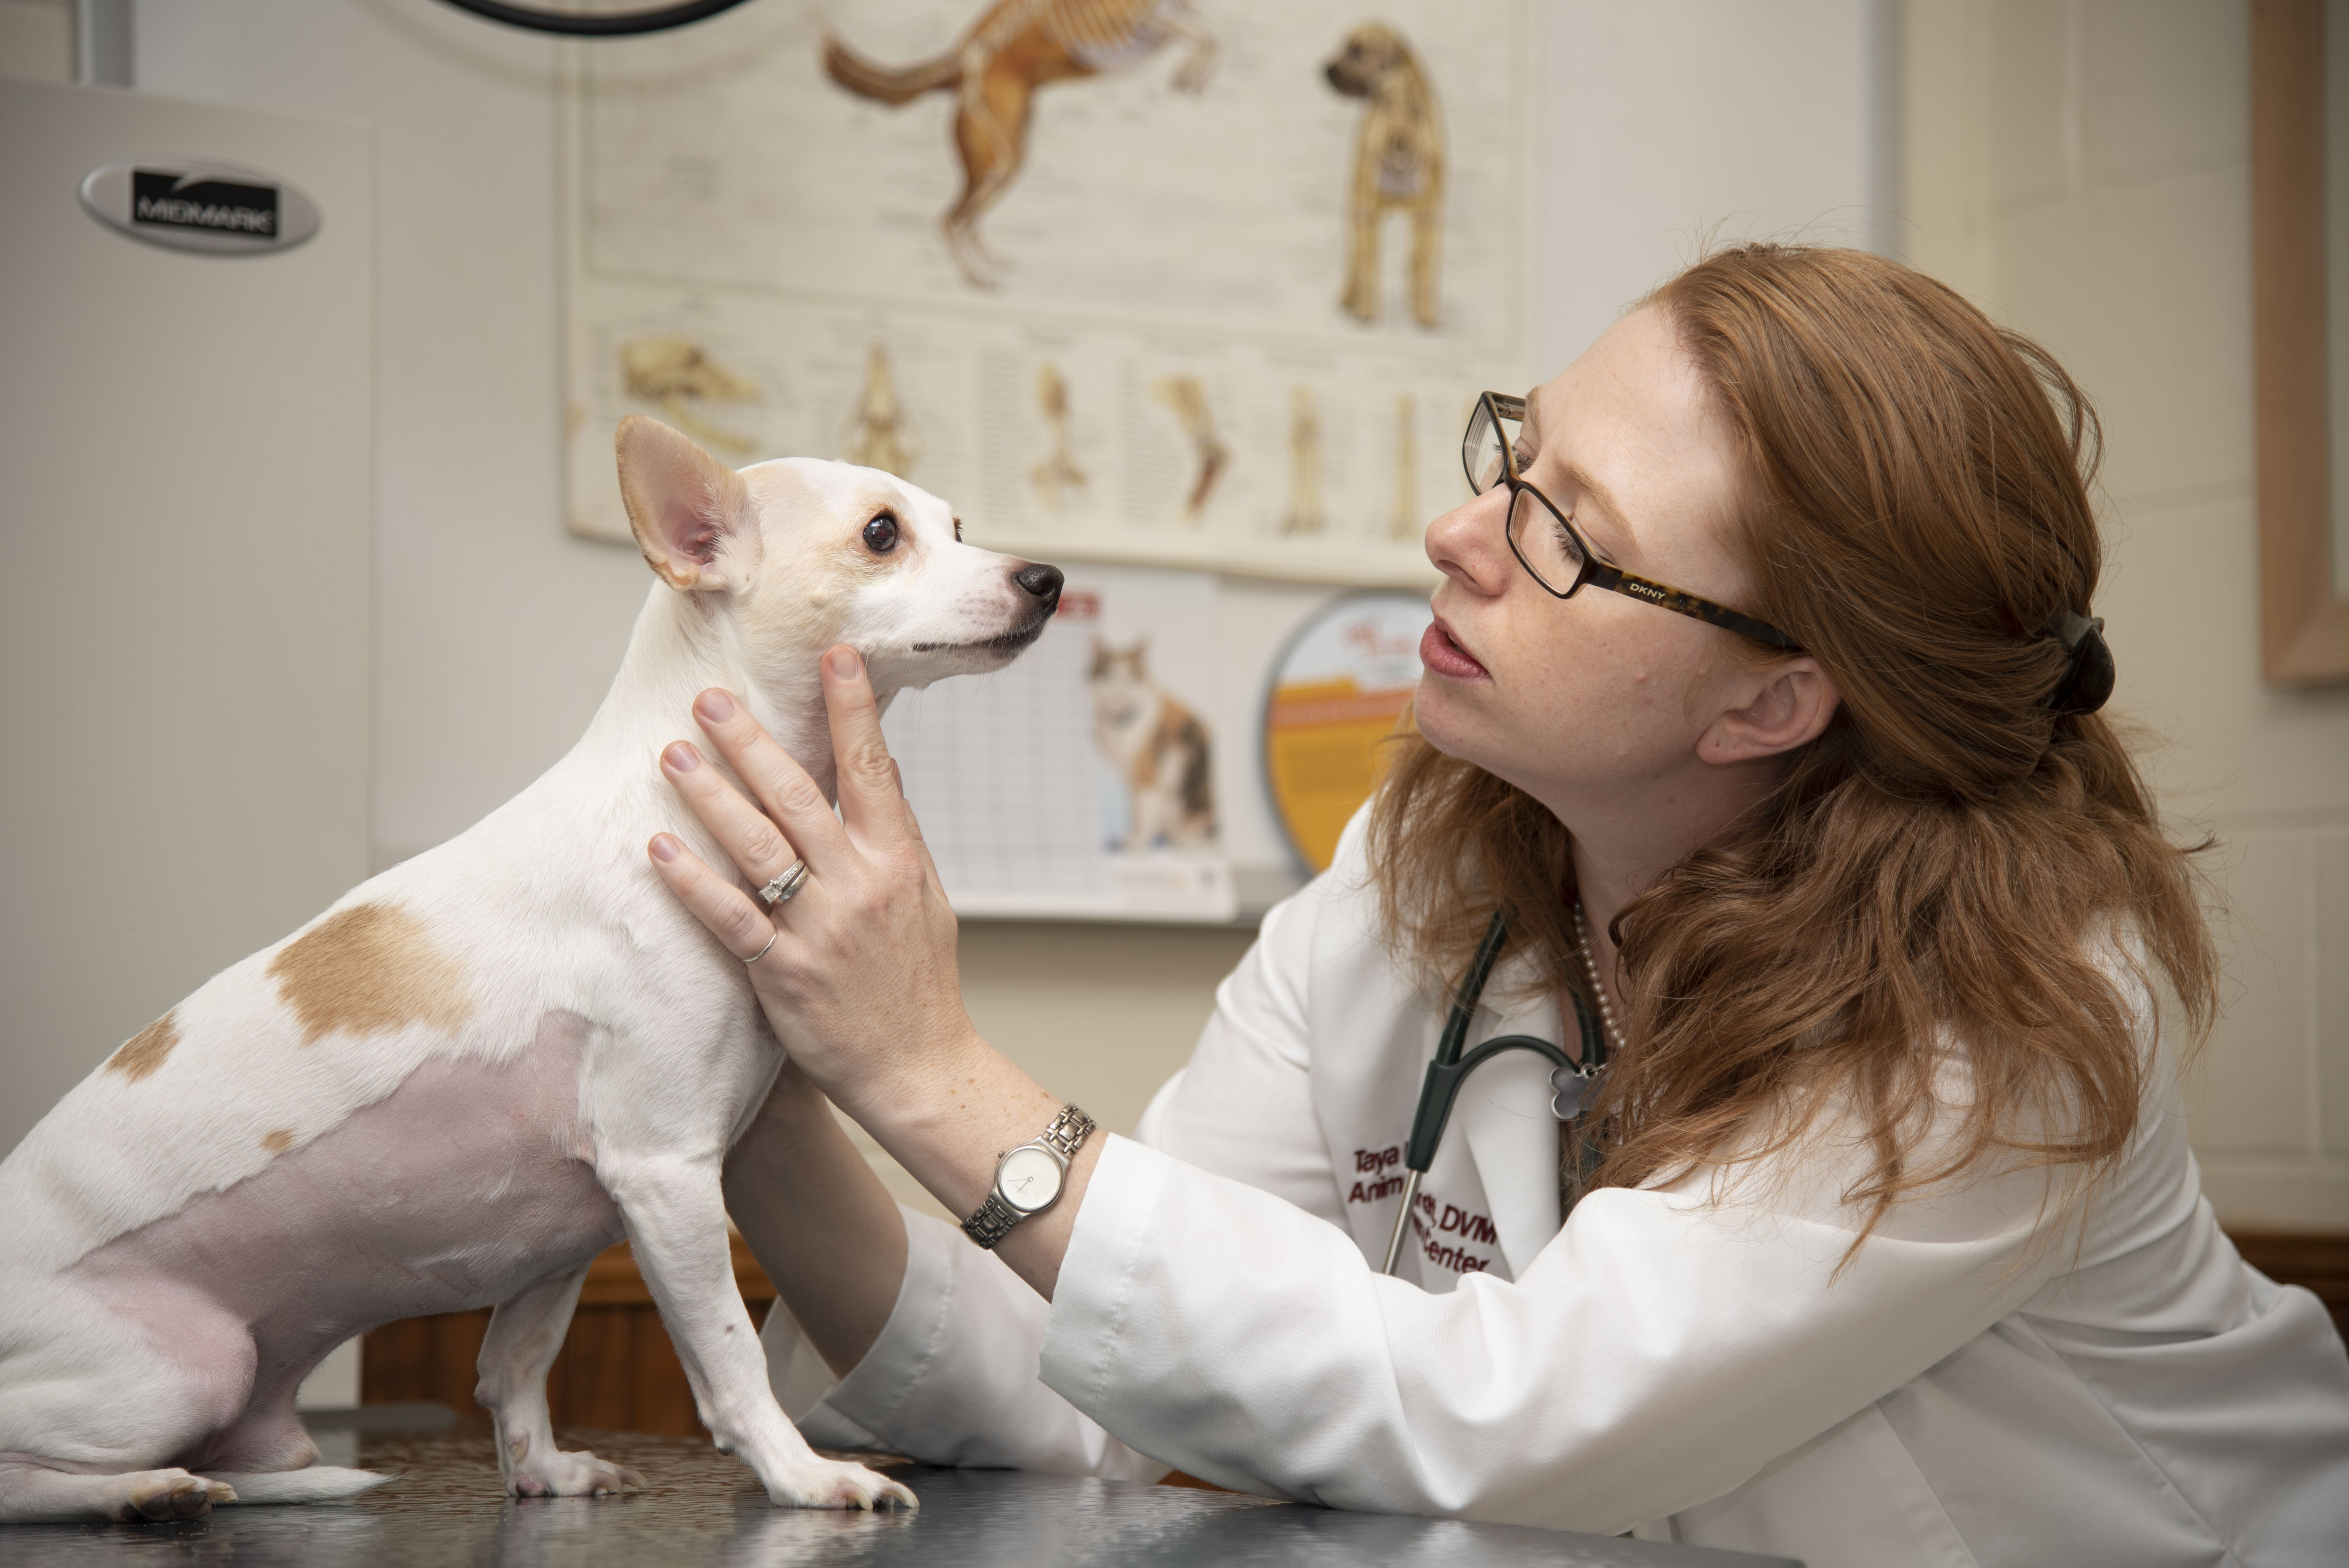 A veterinary oncologist examines her patient